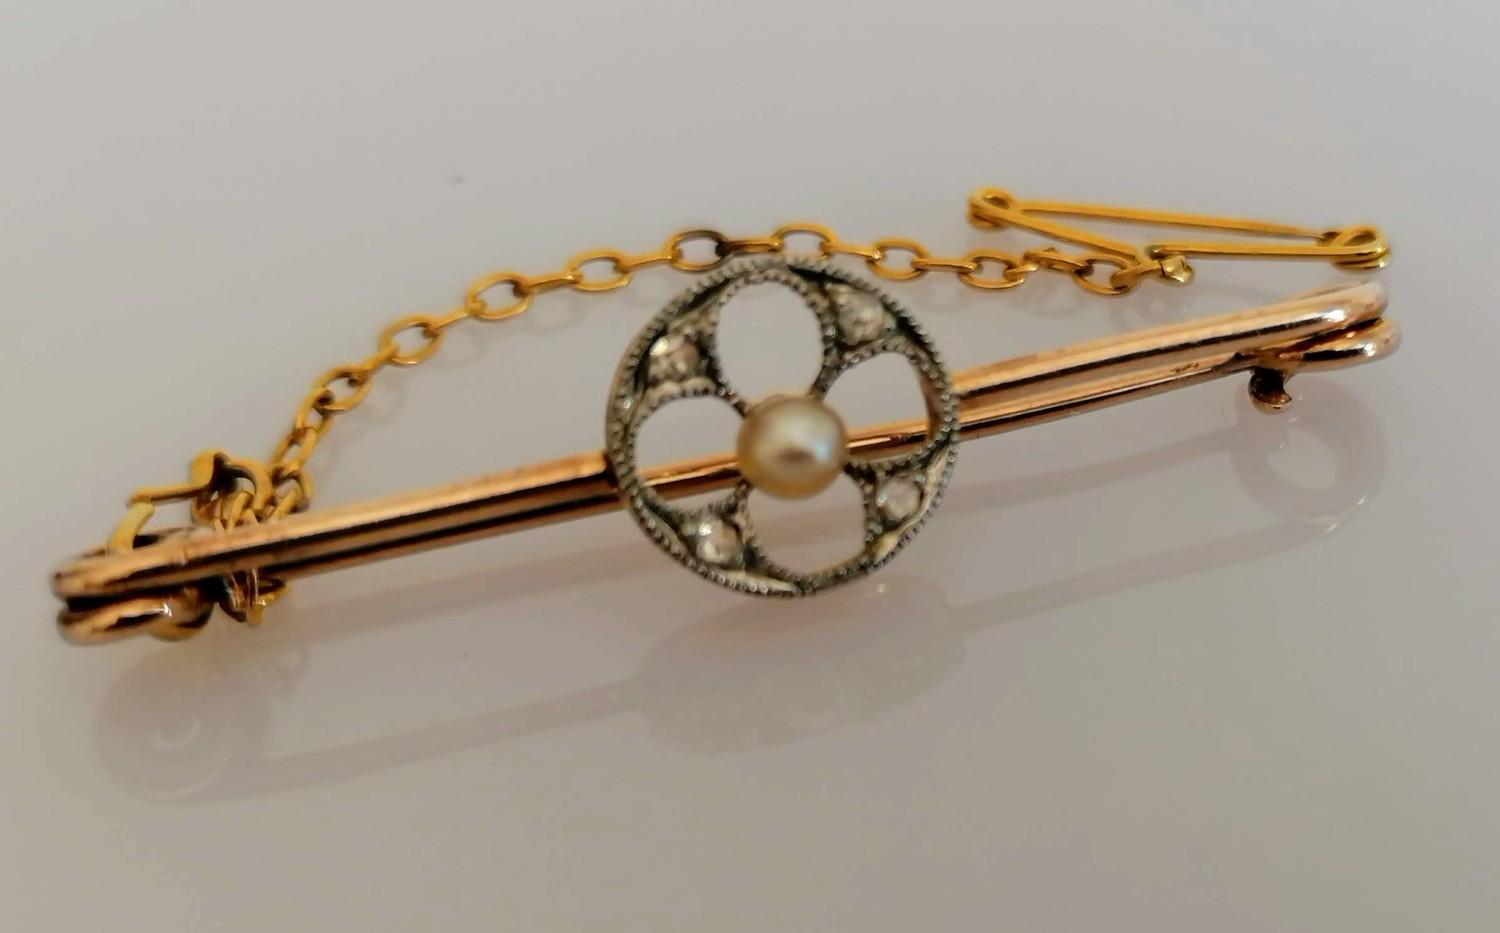 An Edwardian gold brooch with pearl and diamond decoration, safety chain, 4 cm, unmarked but tests